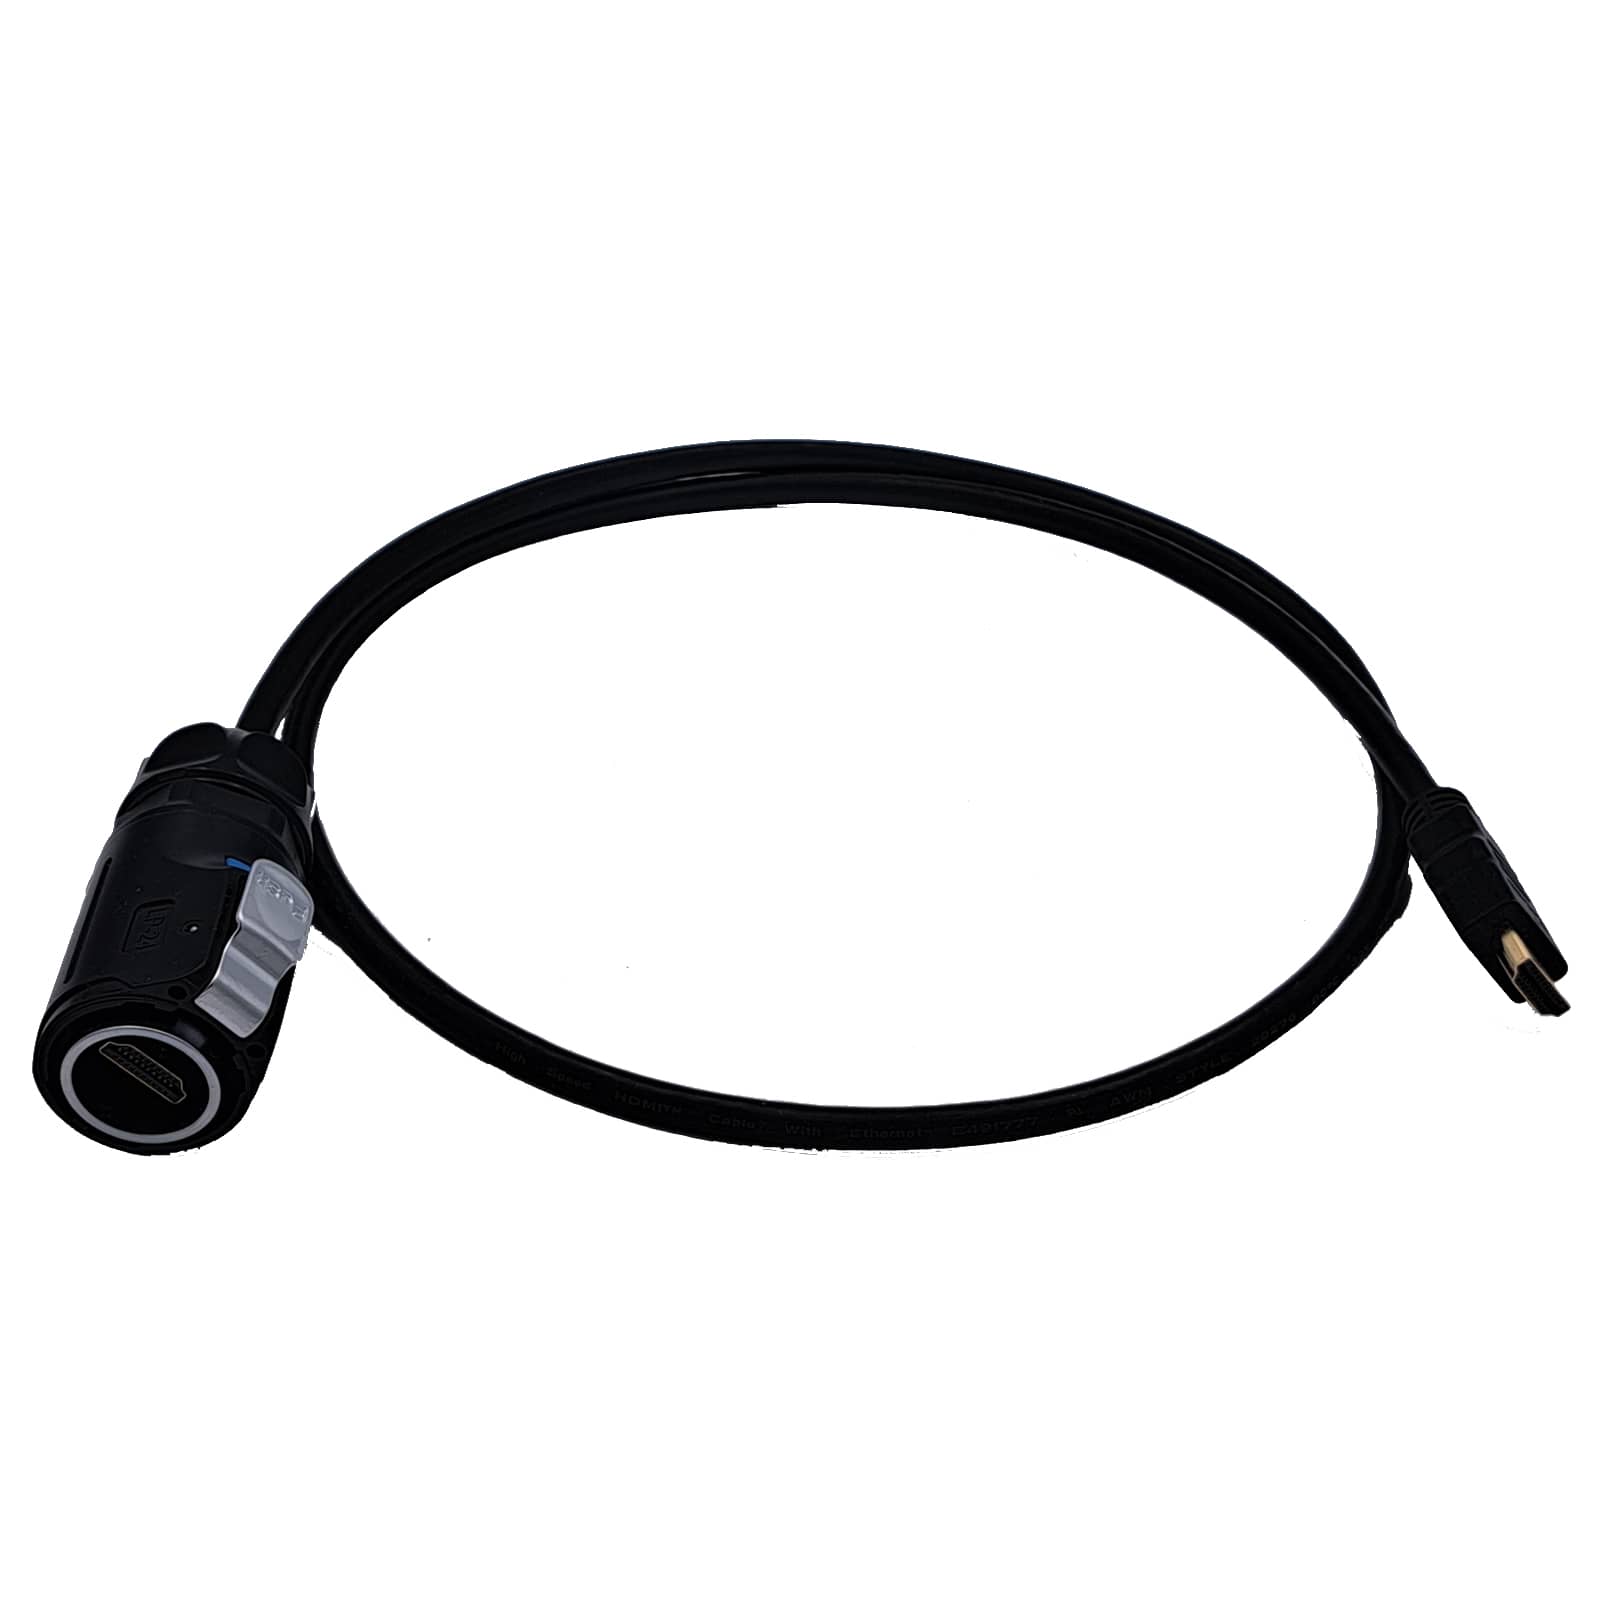 https://connector-distribution.com/media/image/be/37/23/LP24-HDMI-MP-MP-1M-001-Waterproof-HDMI-Cable-1-meter.jpg